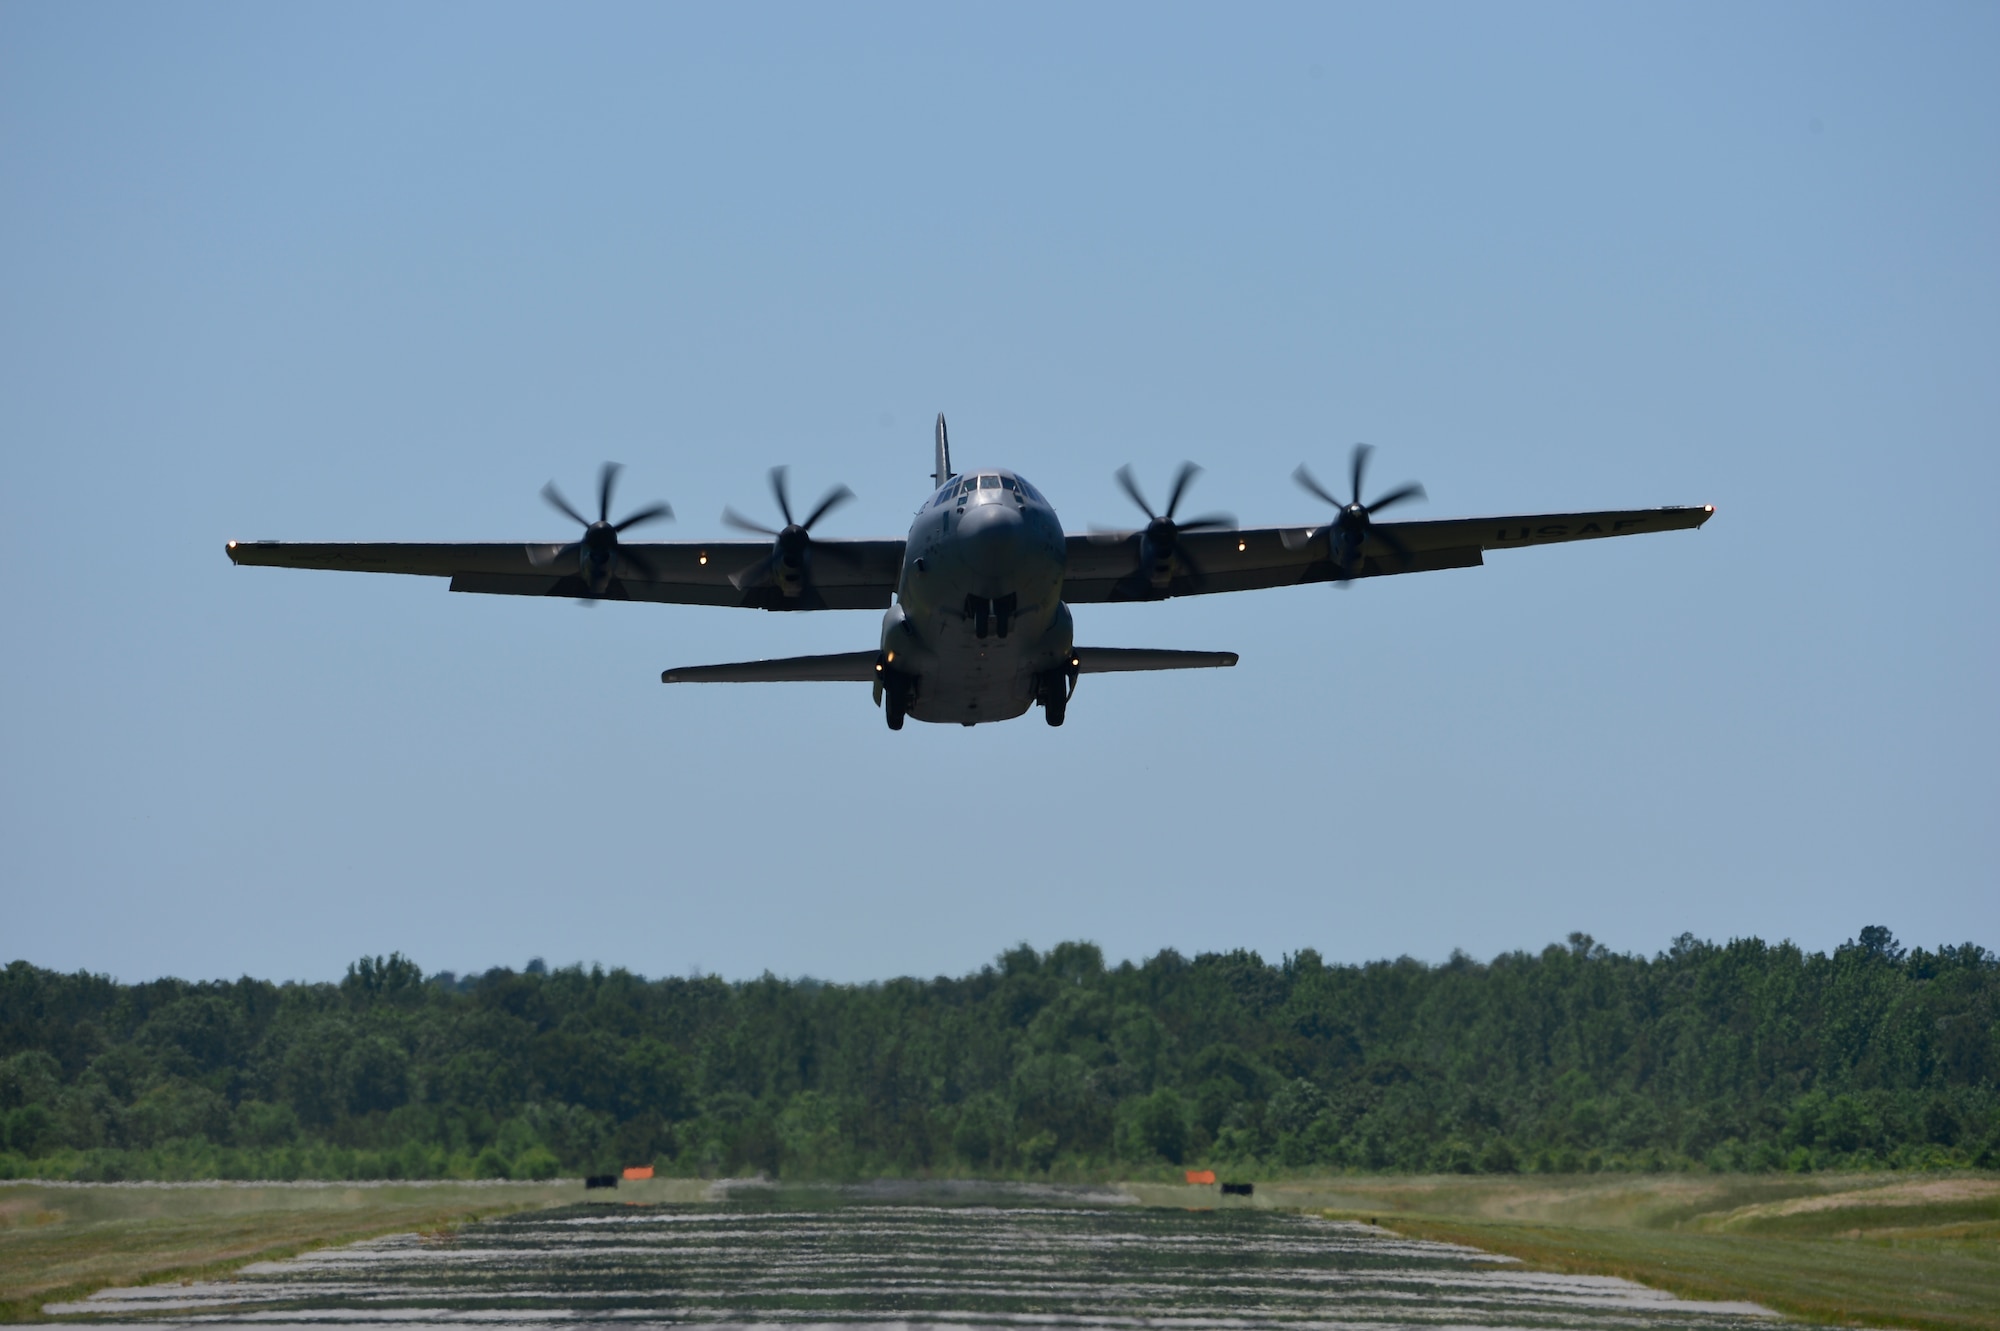 A C-130J assigned to the 19th Airlift Wing takes off at the All-American Landing Zone competeing in the assault landing portion of the “Turkey Shoot” May 13th, 2016, at Camp Robinson, Ark. Six units from Team Little Rock participated in this iteration with the overarching objective to hone combat airlift fundamentals. (U.S. Air Force photo by Staff Sgt. Jeremy McGuffin)
